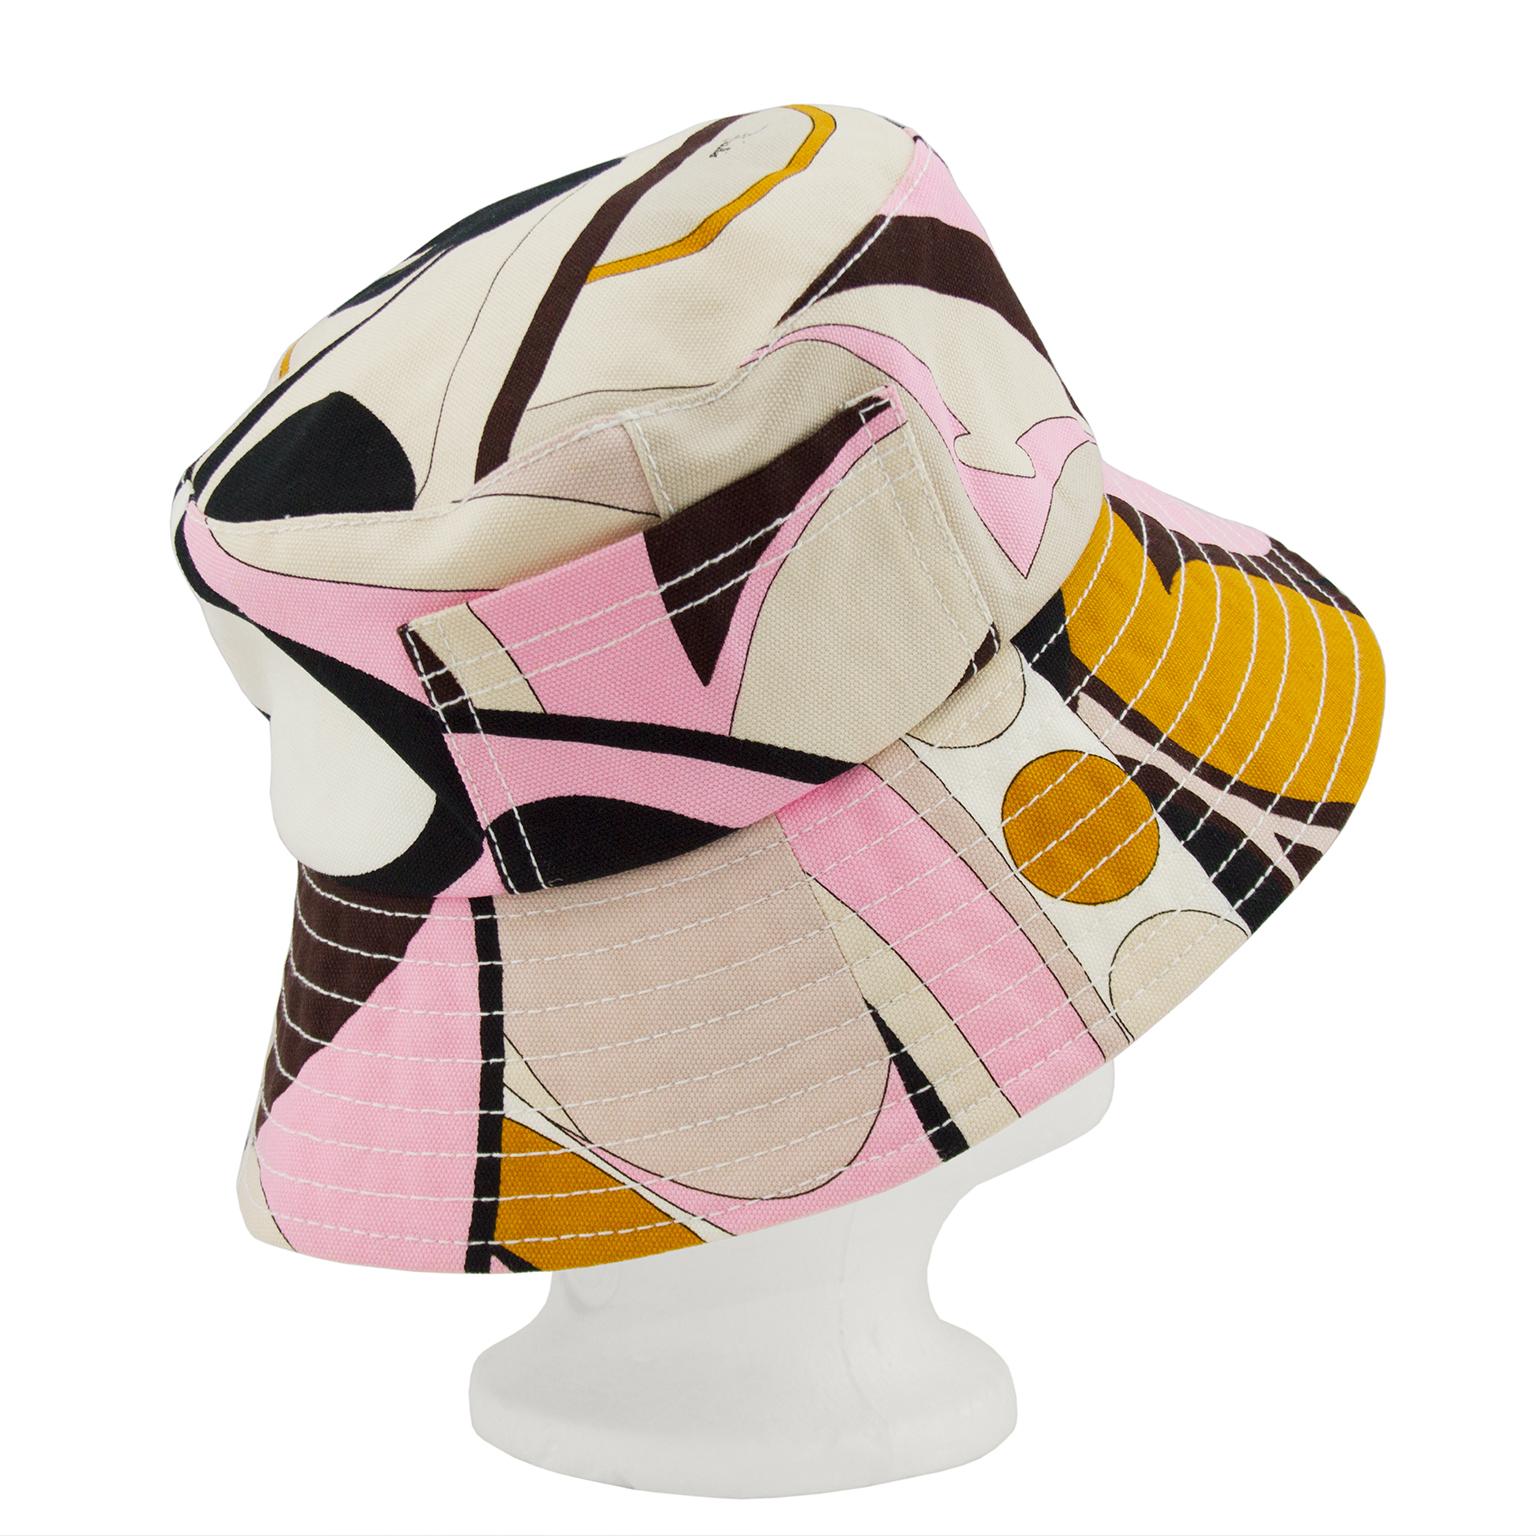 Emilio Pucci brown, pink, beige and yellow abstract printed canvas bucket hat from the late 1990s, early 2000s. A snug fit with a white interior and cream stitching along the brim. In excellent condition, one pocket on the exterior, perfect for a